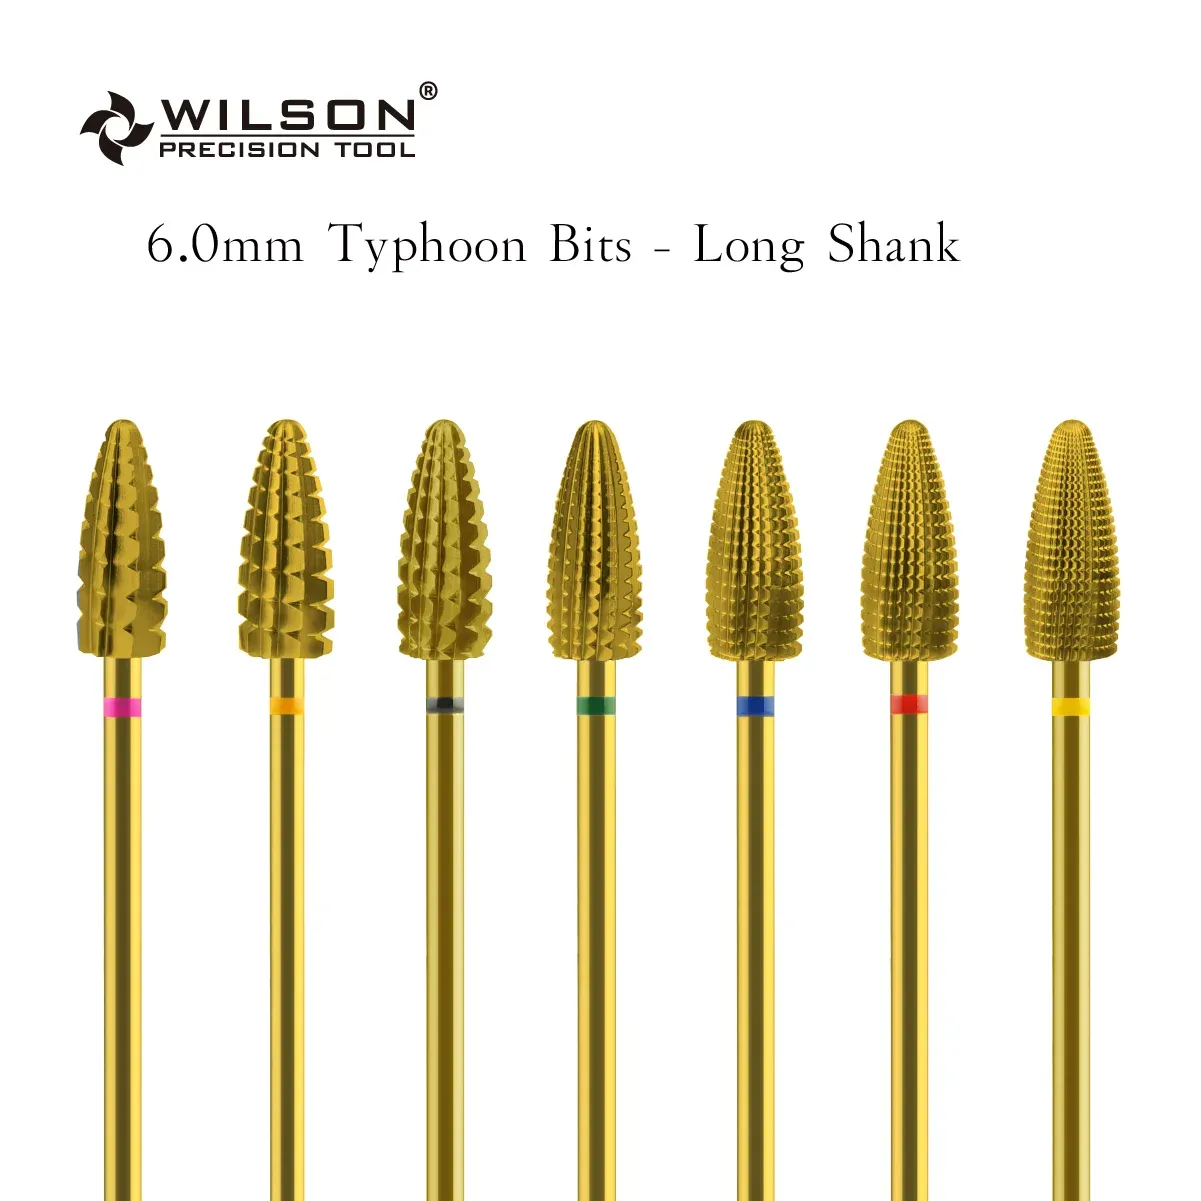 Bits WILSON{Typhoon Bit}Nail drill bits Remove gel carbide Manicure tool Manicure Tools Hot sale/Free shipping